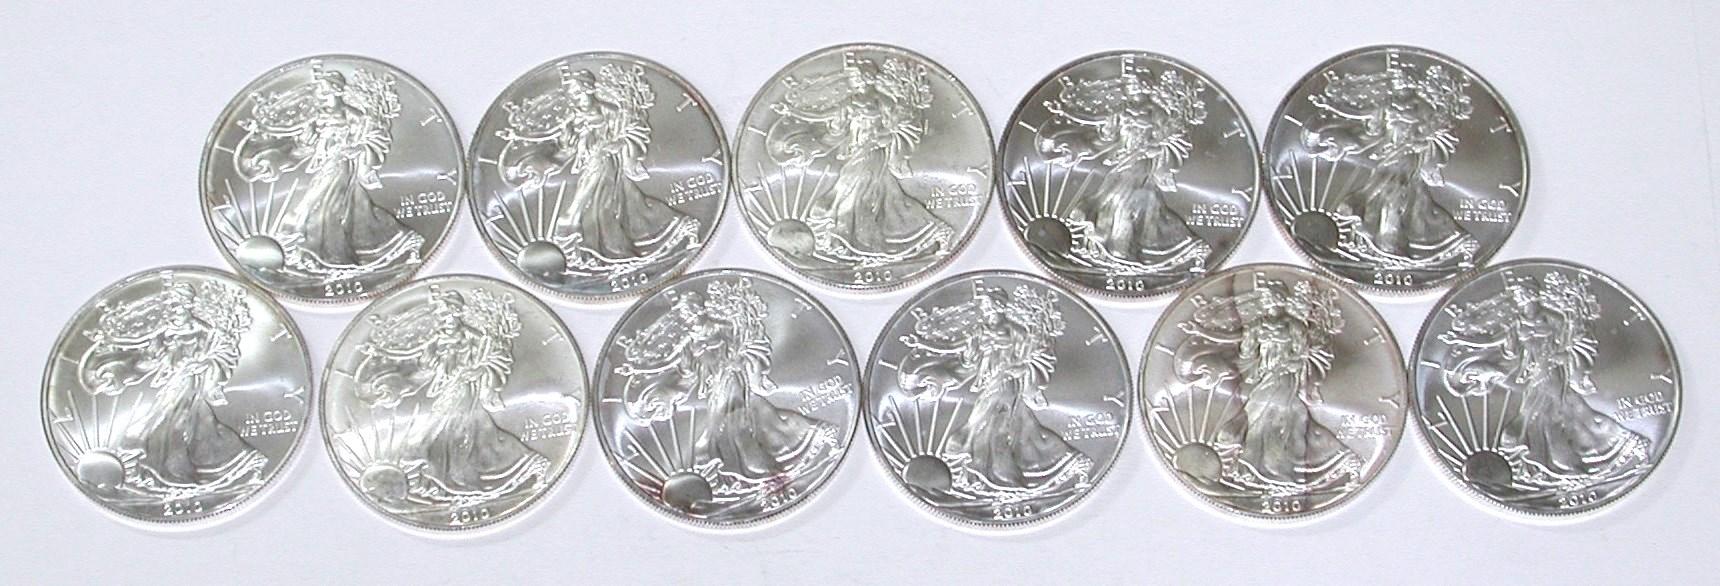 11 - 2010 UNCIRCULATED SILVER EAGLES